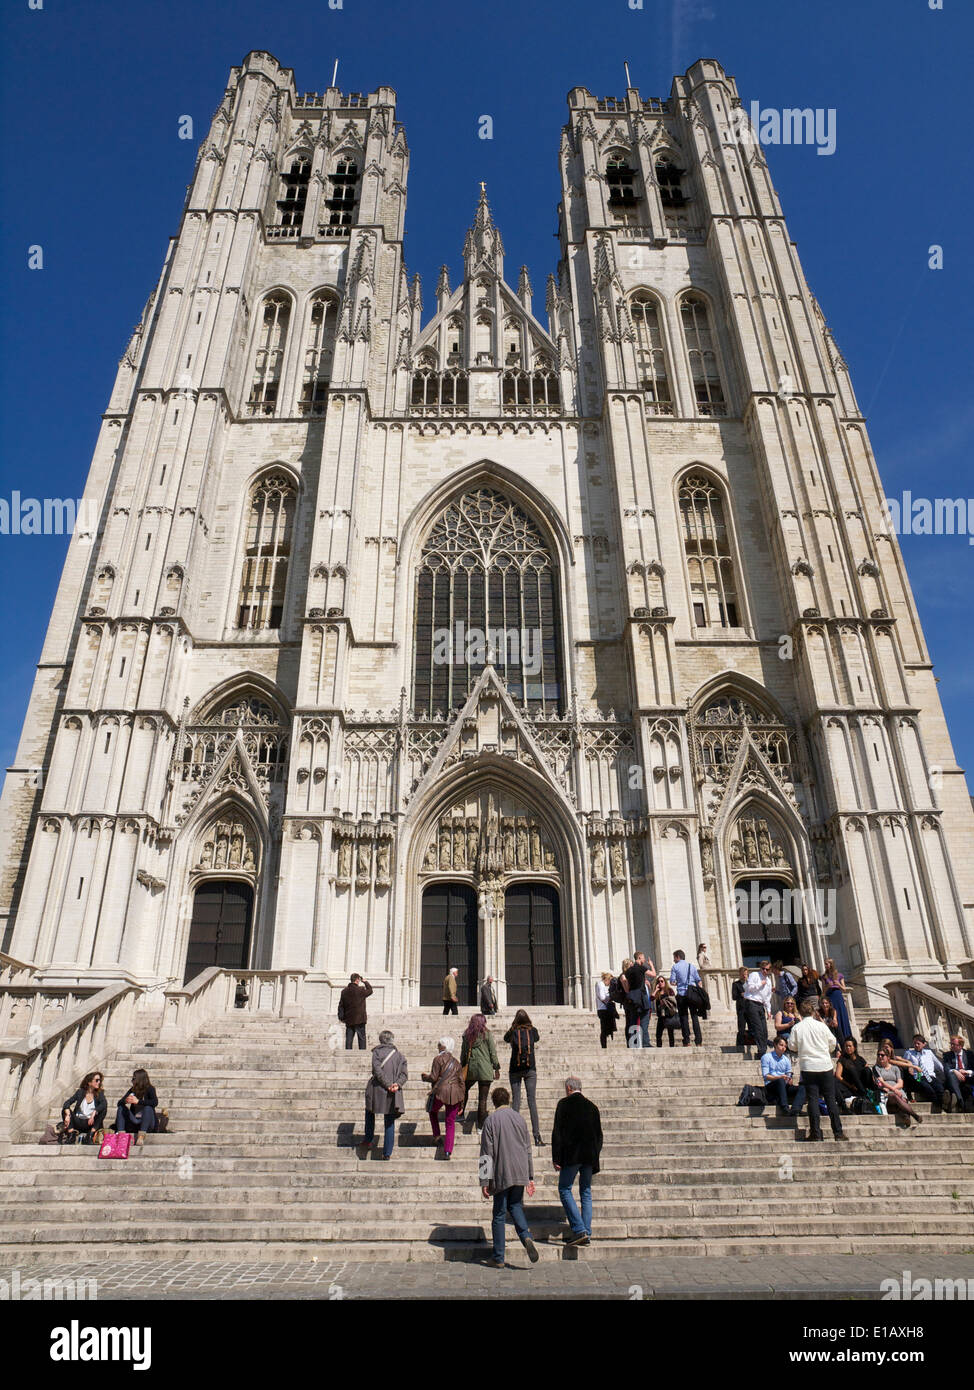 The Sint Michiels en Goedele cathedral in the city center of Brussels, Belgium Stock Photo